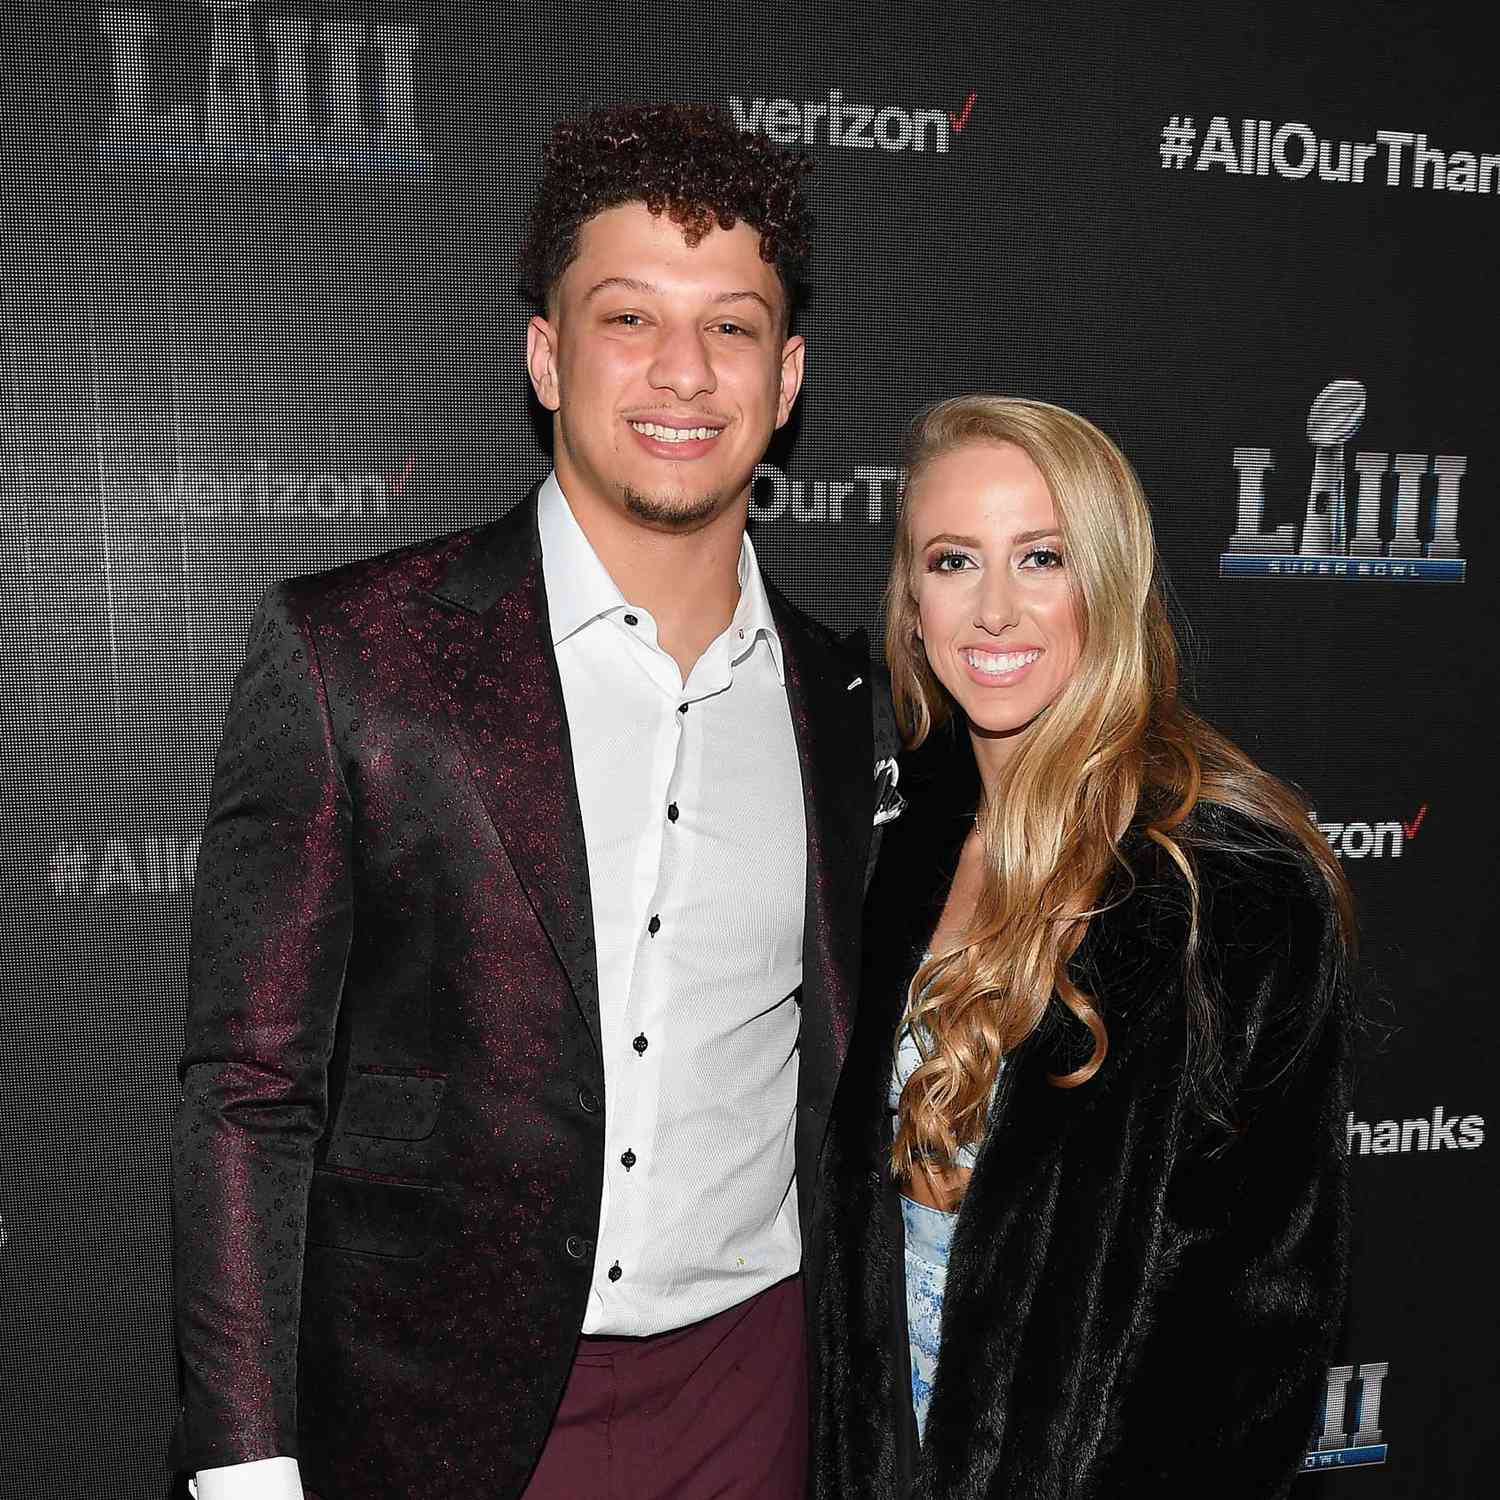 New $80 Million Investment by Patrick Mahomes and Wife Brittany in a Groundbreaking Women's Soccer Stadium - amazingdailynews.com